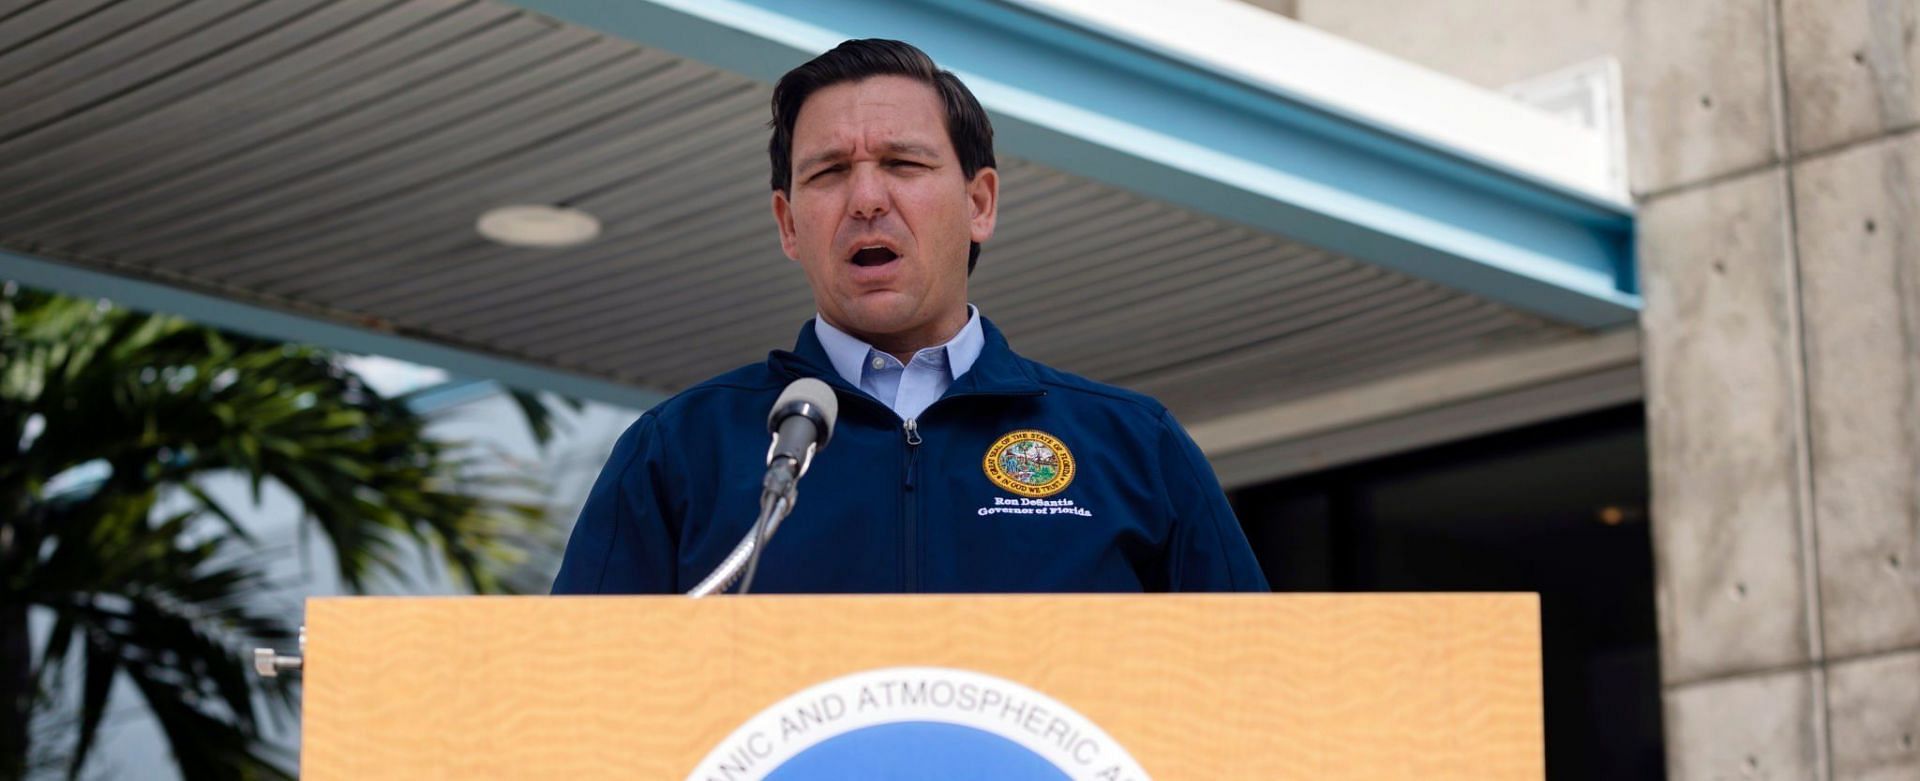 Ron DeSantis has been serving as the 46th governor of Florida since 2019 (Image via Getty Images)